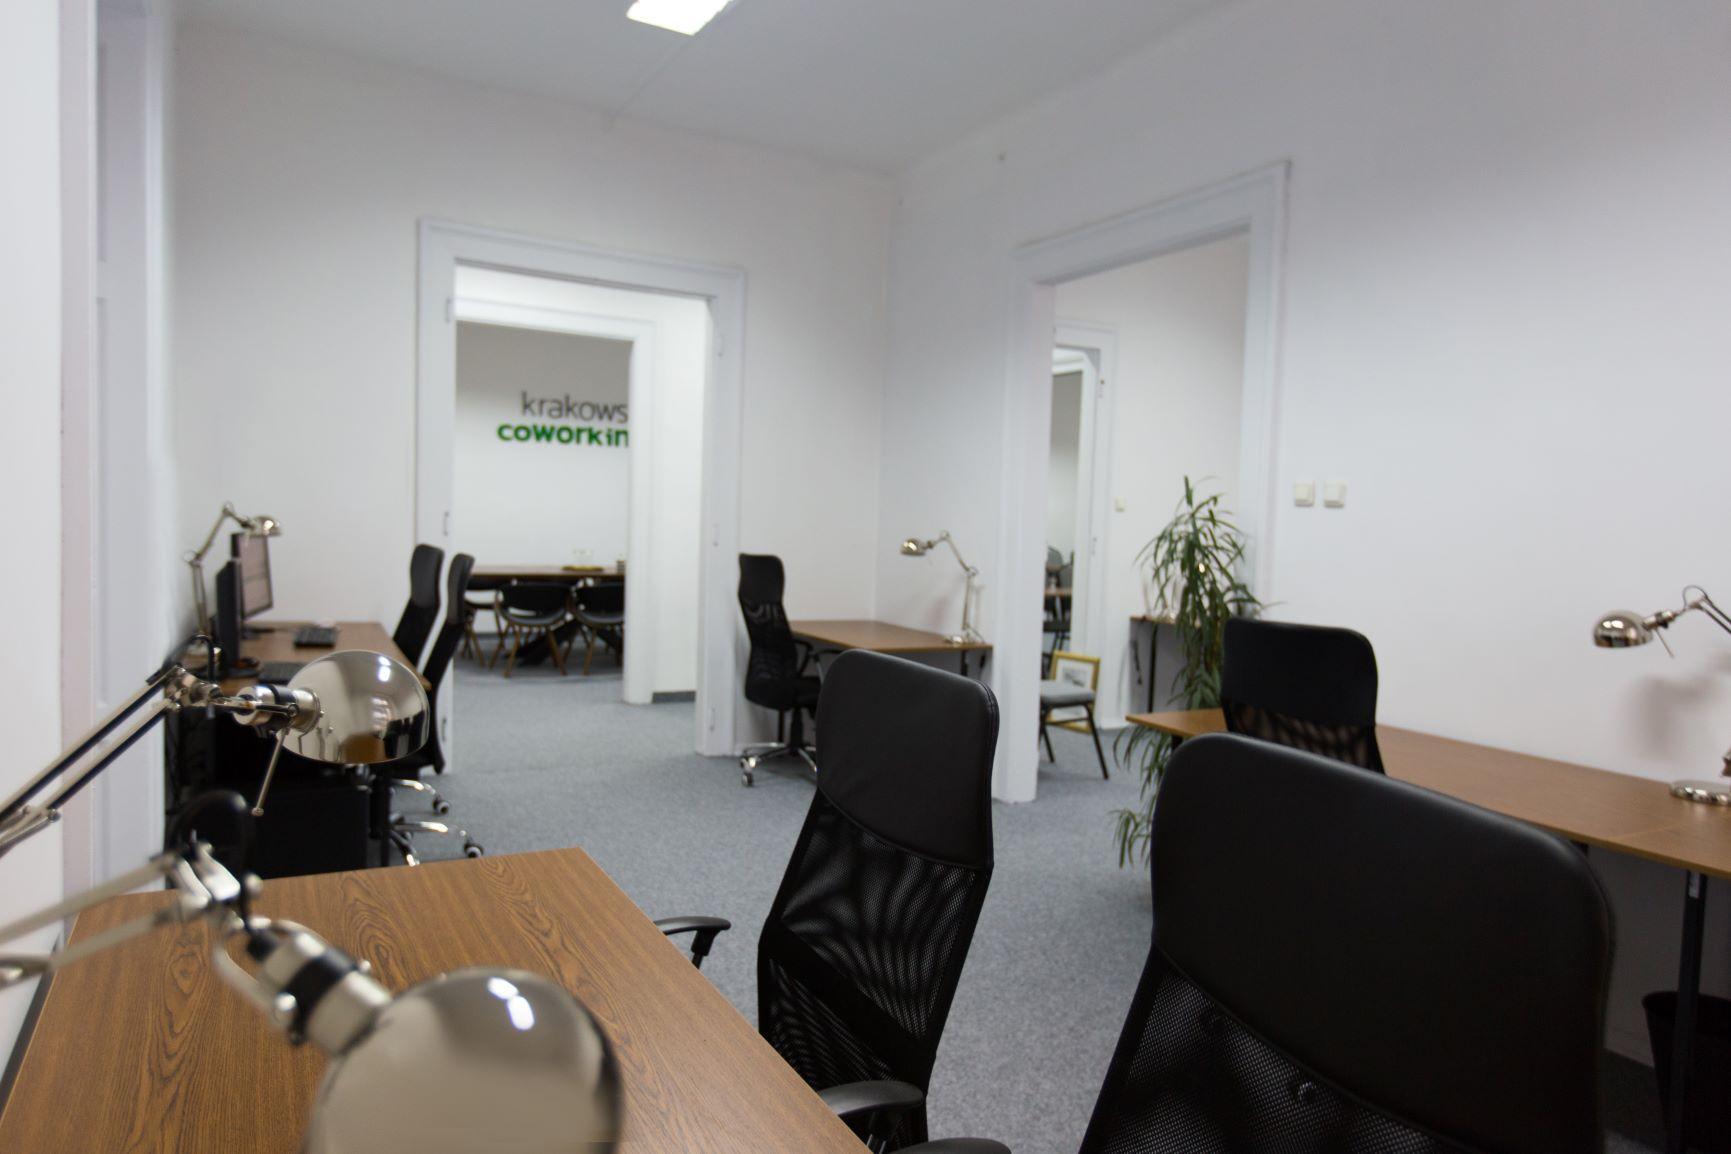 Office for 7 pers. in Krakowski Coworking